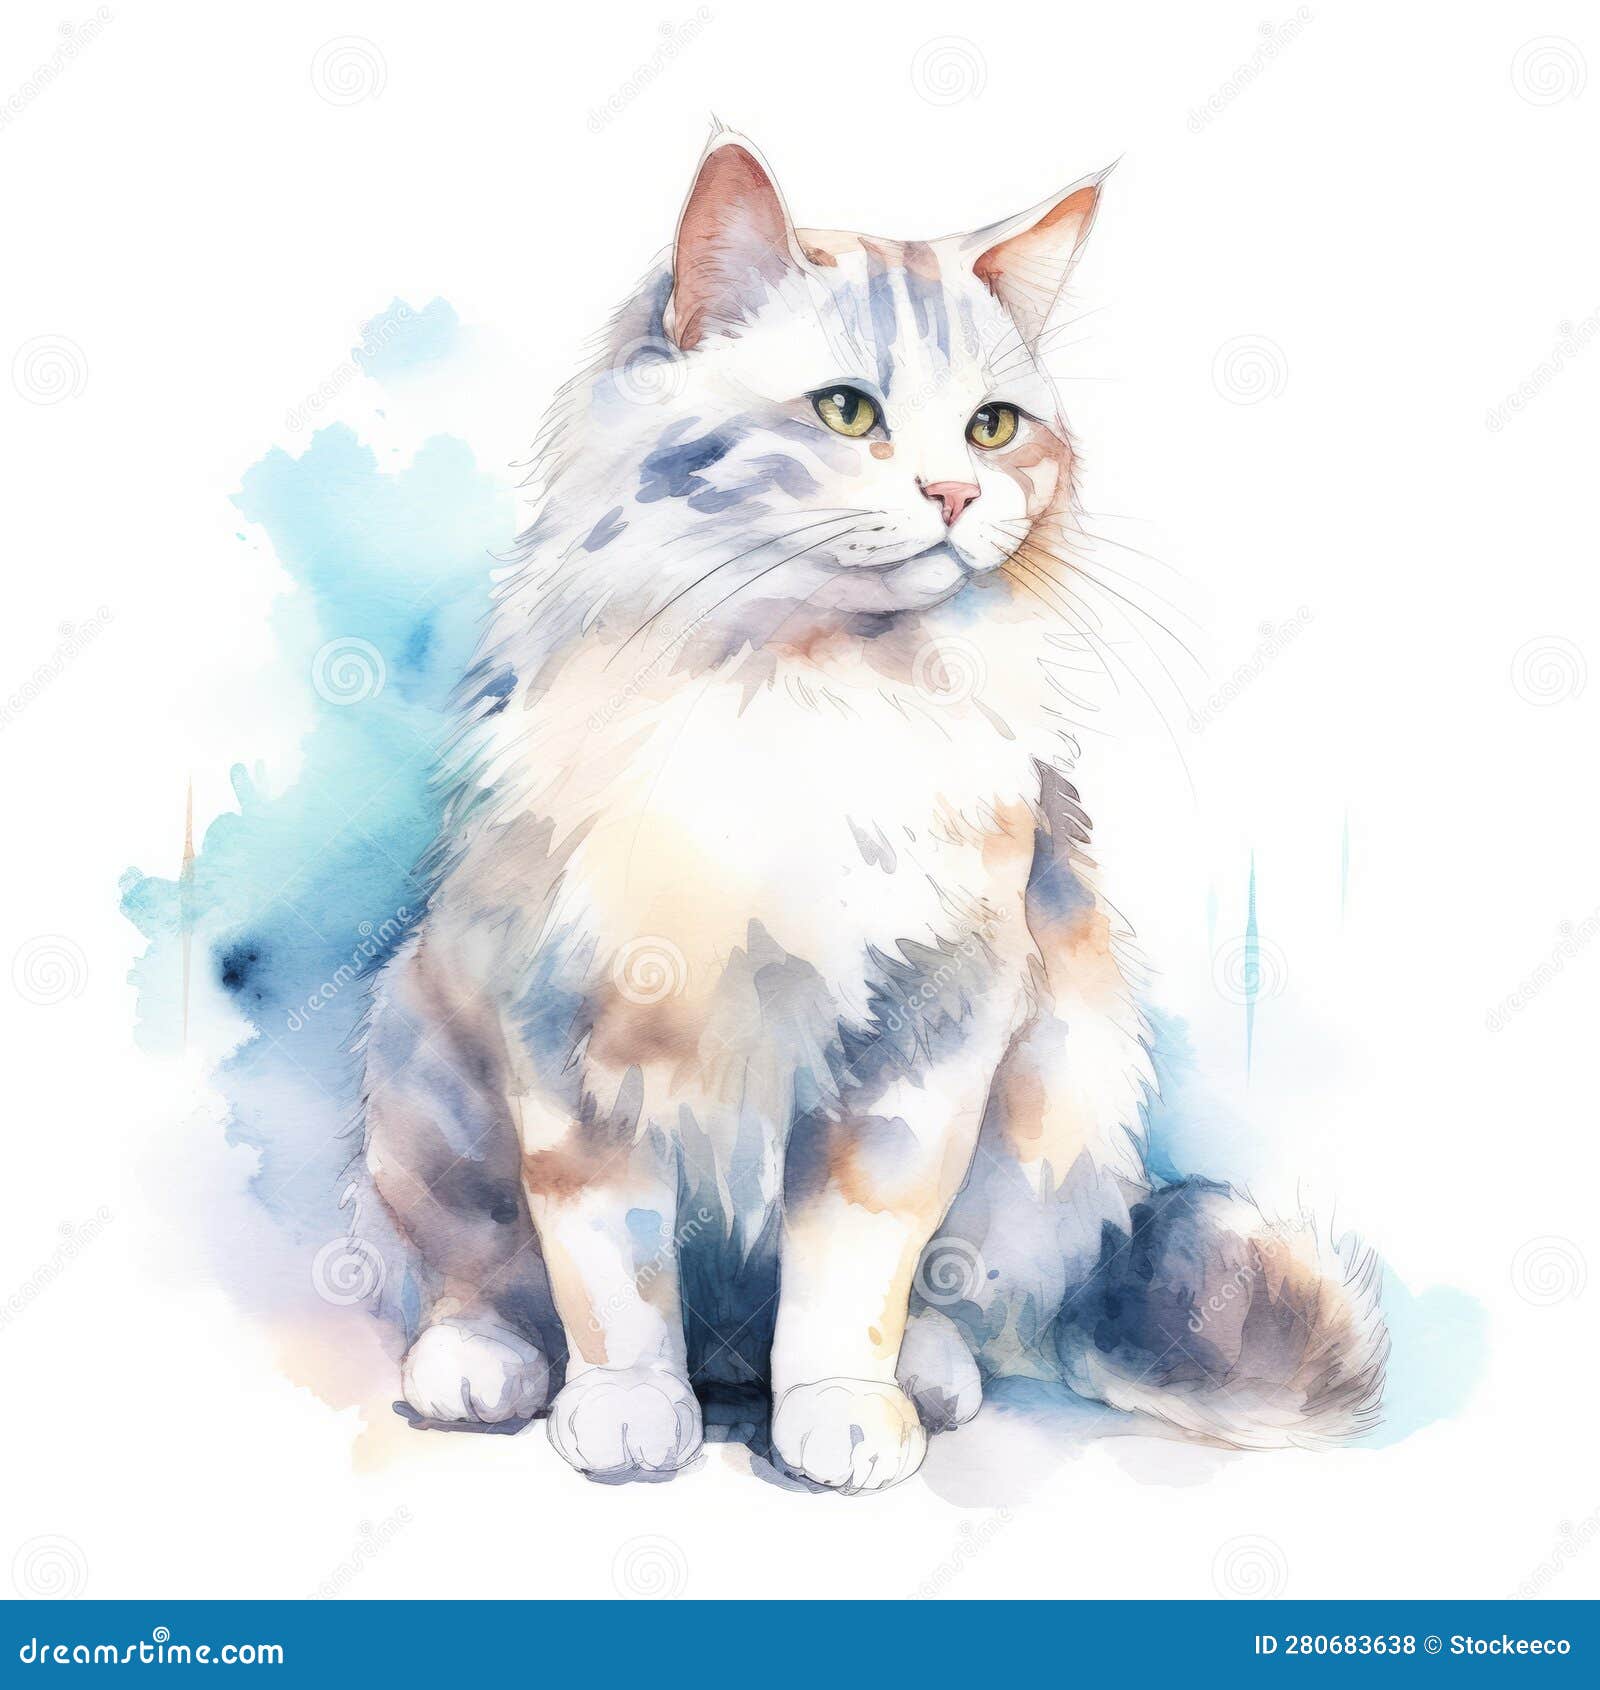 Watercolor Illustration of a Majestic Cat in Realistic Color Schemes ...